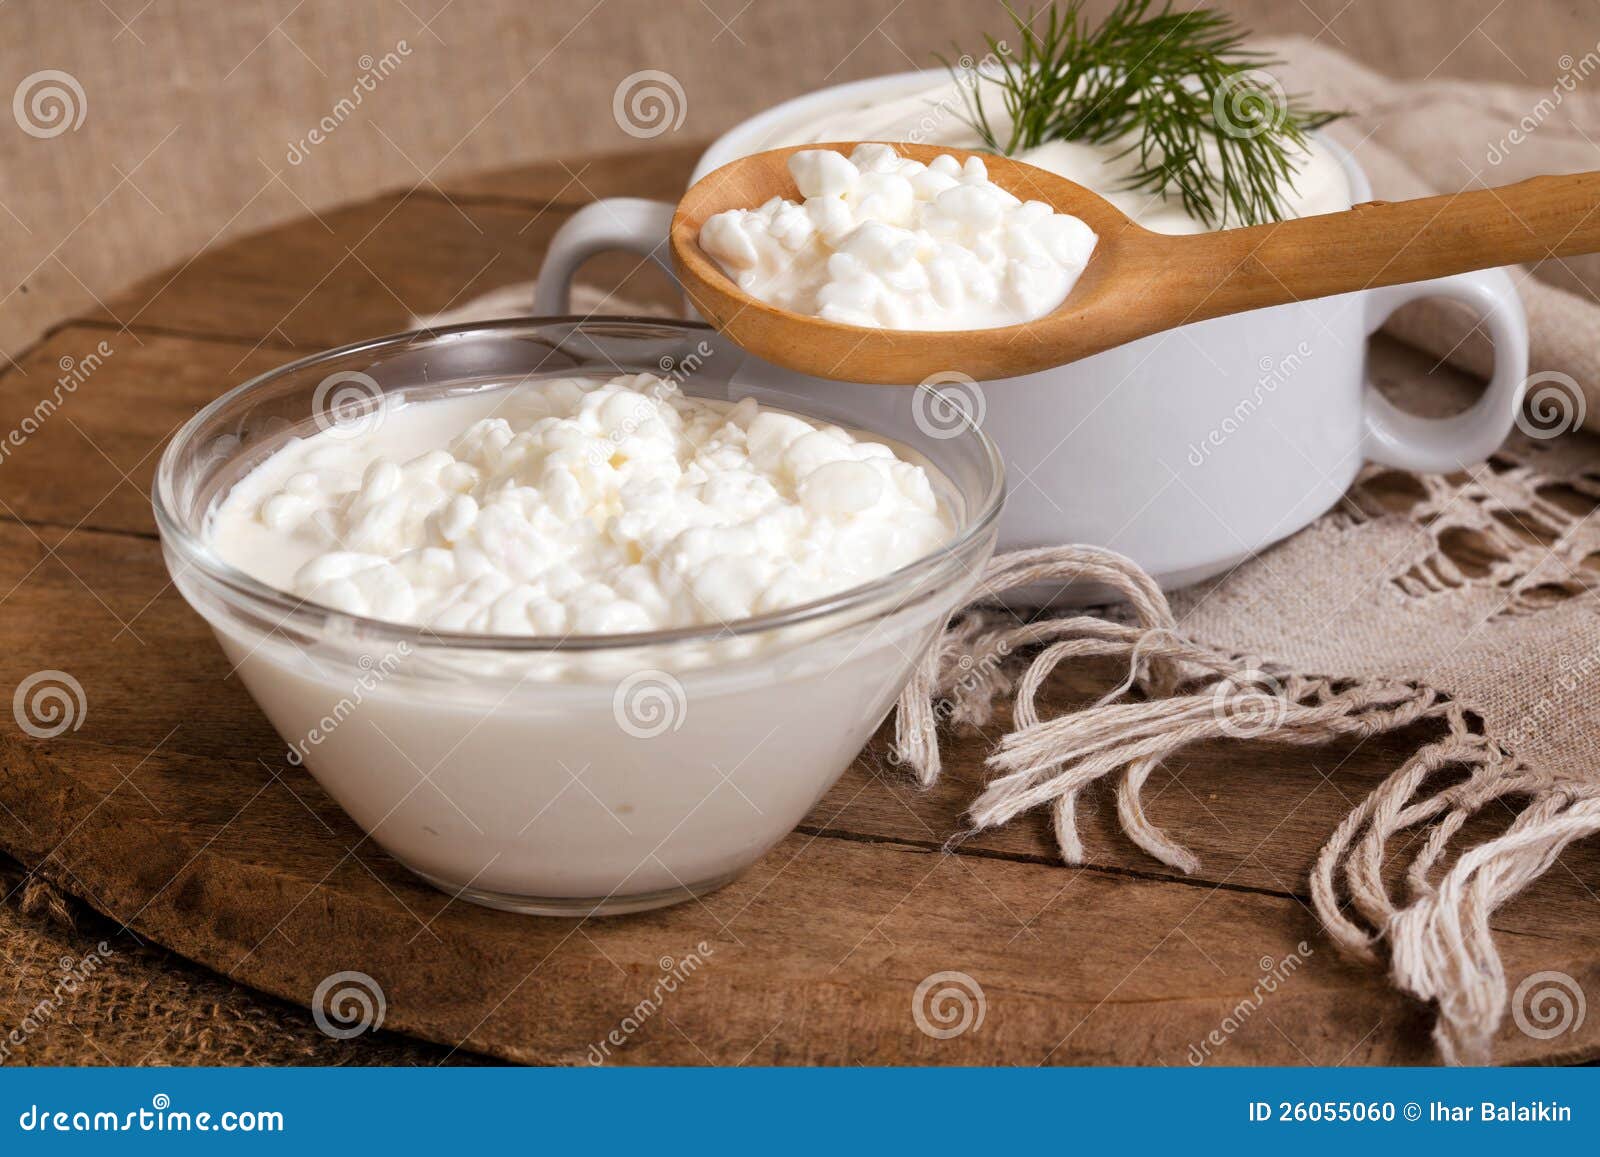 cottage cheese in a plate